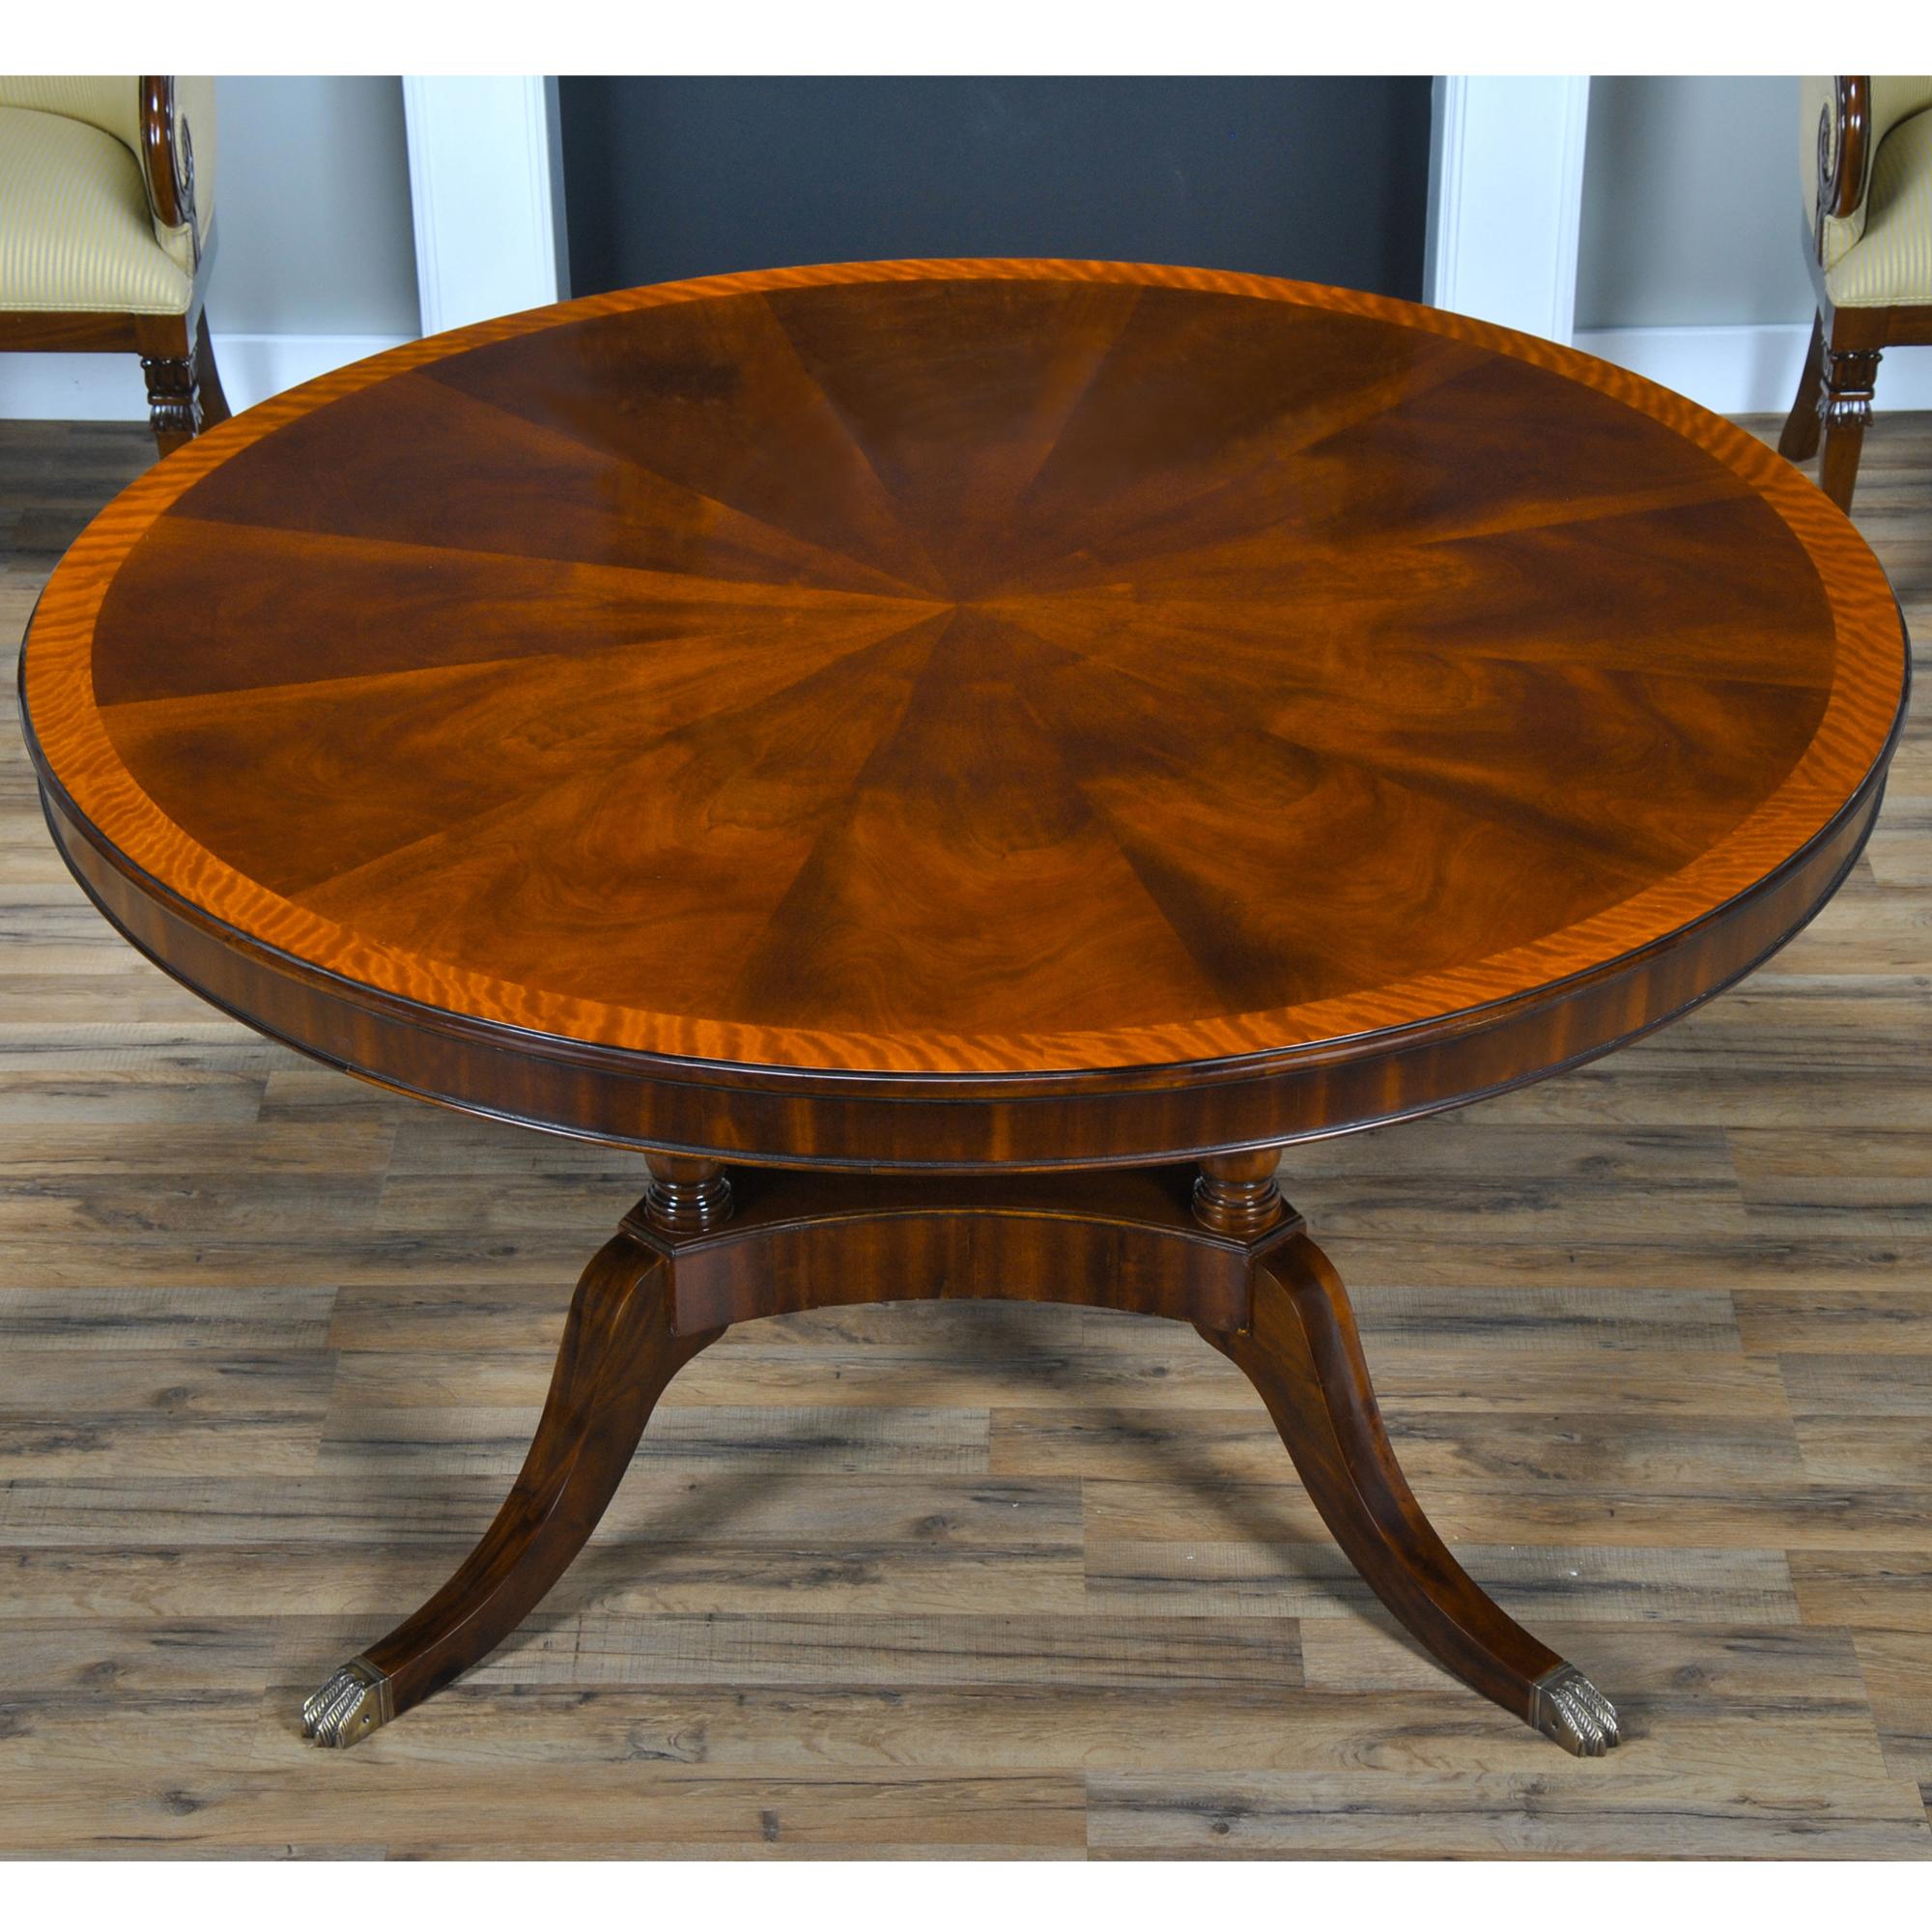 The 60 inch Round Dining Table is produced with a figured mahogany field and satinwood banding on the top which makes for an interesting contrast. The elegant base is pillared over top a central platform resting on shaped and tapered legs capped